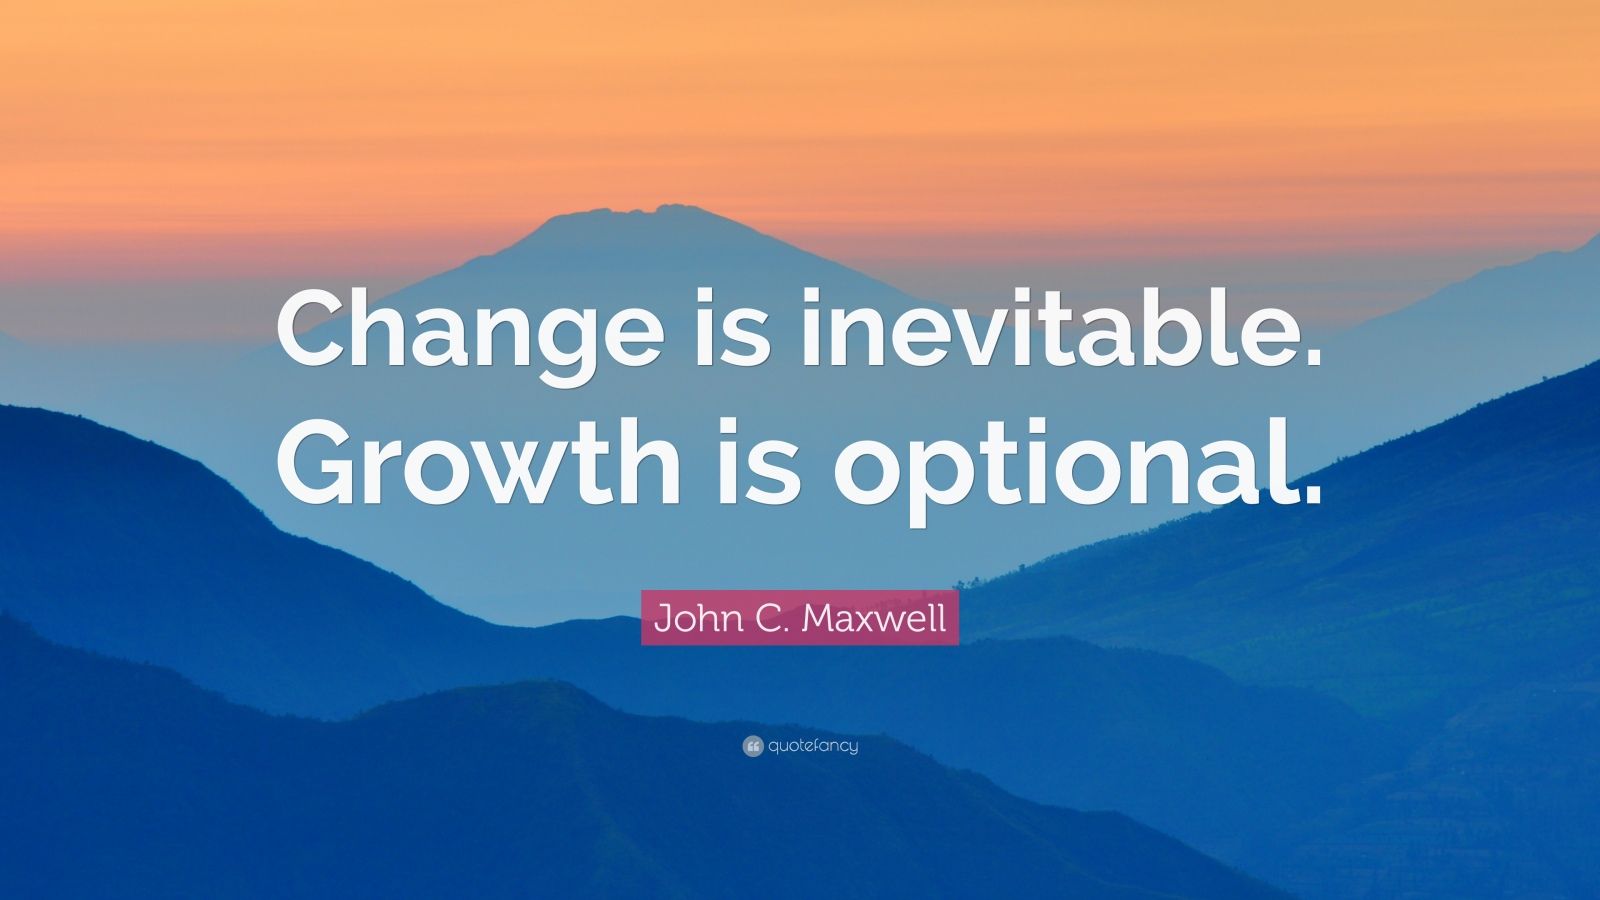 John C. Maxwell Quote “Change is inevitable. Growth is